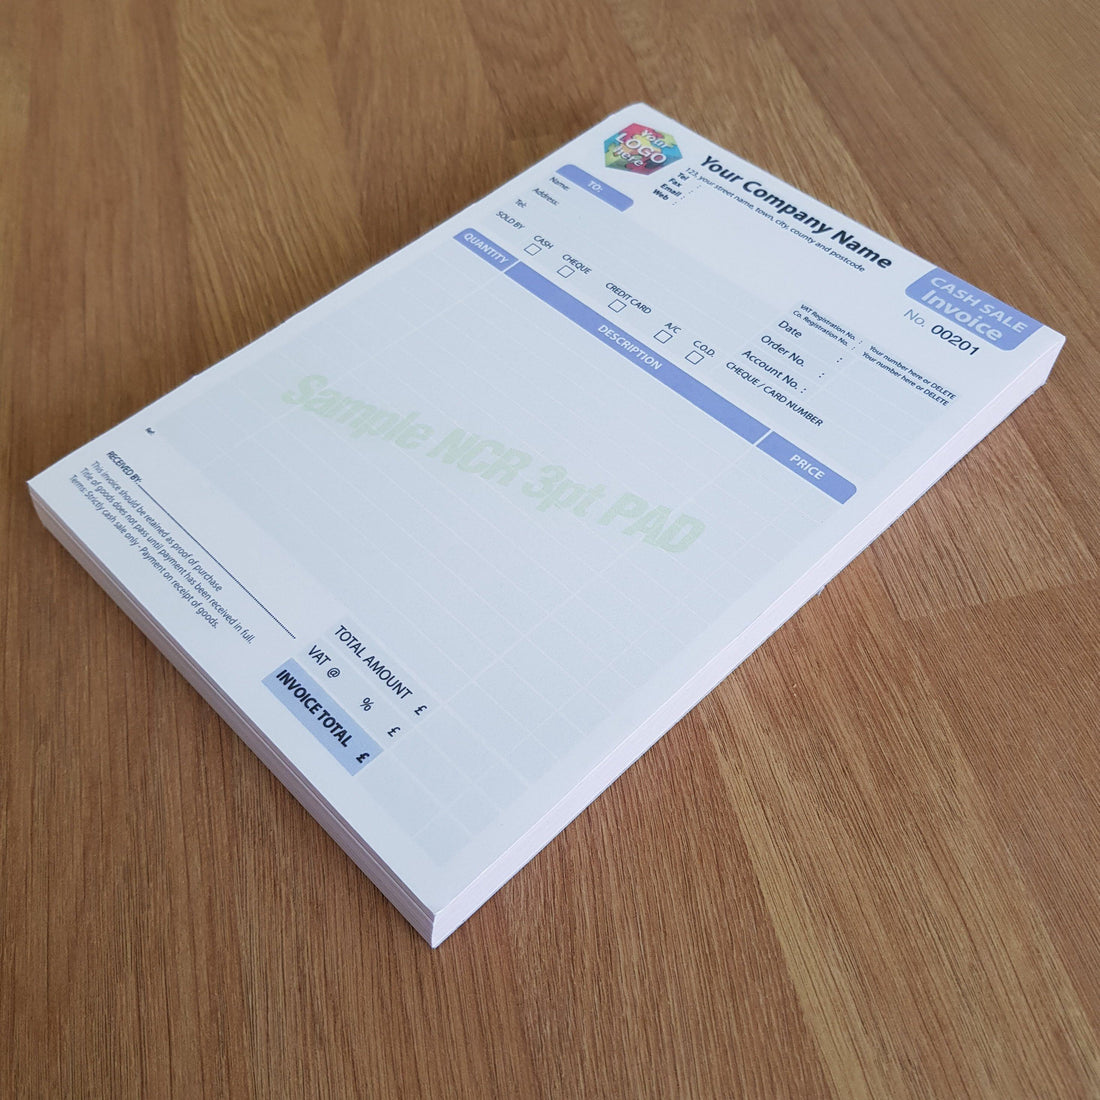 Do you need bespoke Carbonless NCR Pads?